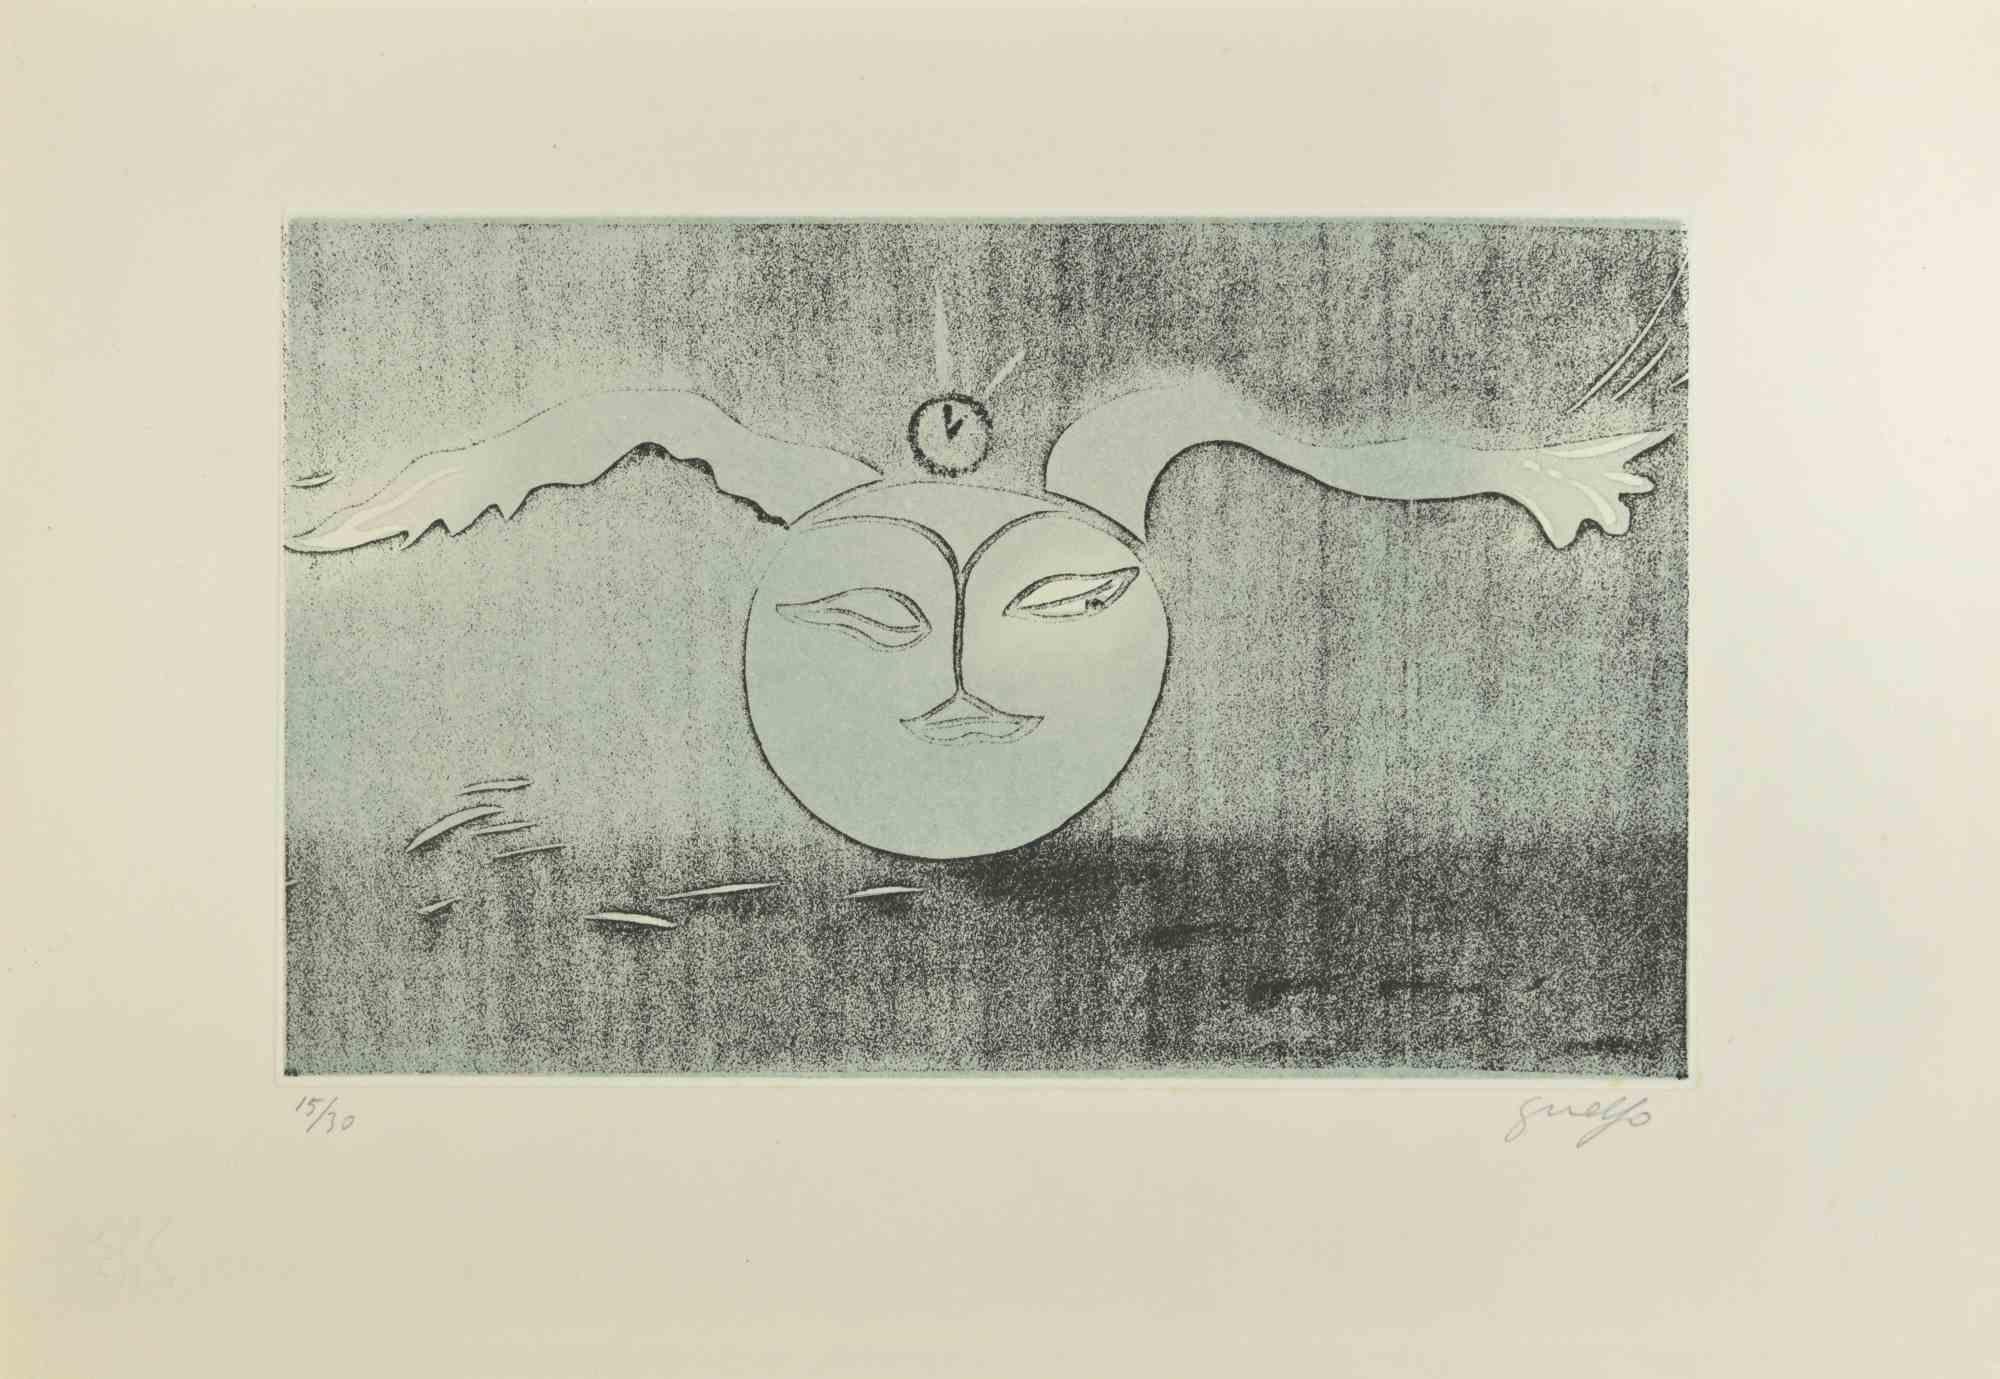 Full Moon  is a Contemporary Artwork realized by the Italian Artist Guelfo Bianchini (Ancona, 1937) in 1978.

Original colored Etching on paper. 

Hand-signed  in pencil on the lower right corner: Guelfo . Numbered on the lower left corner in